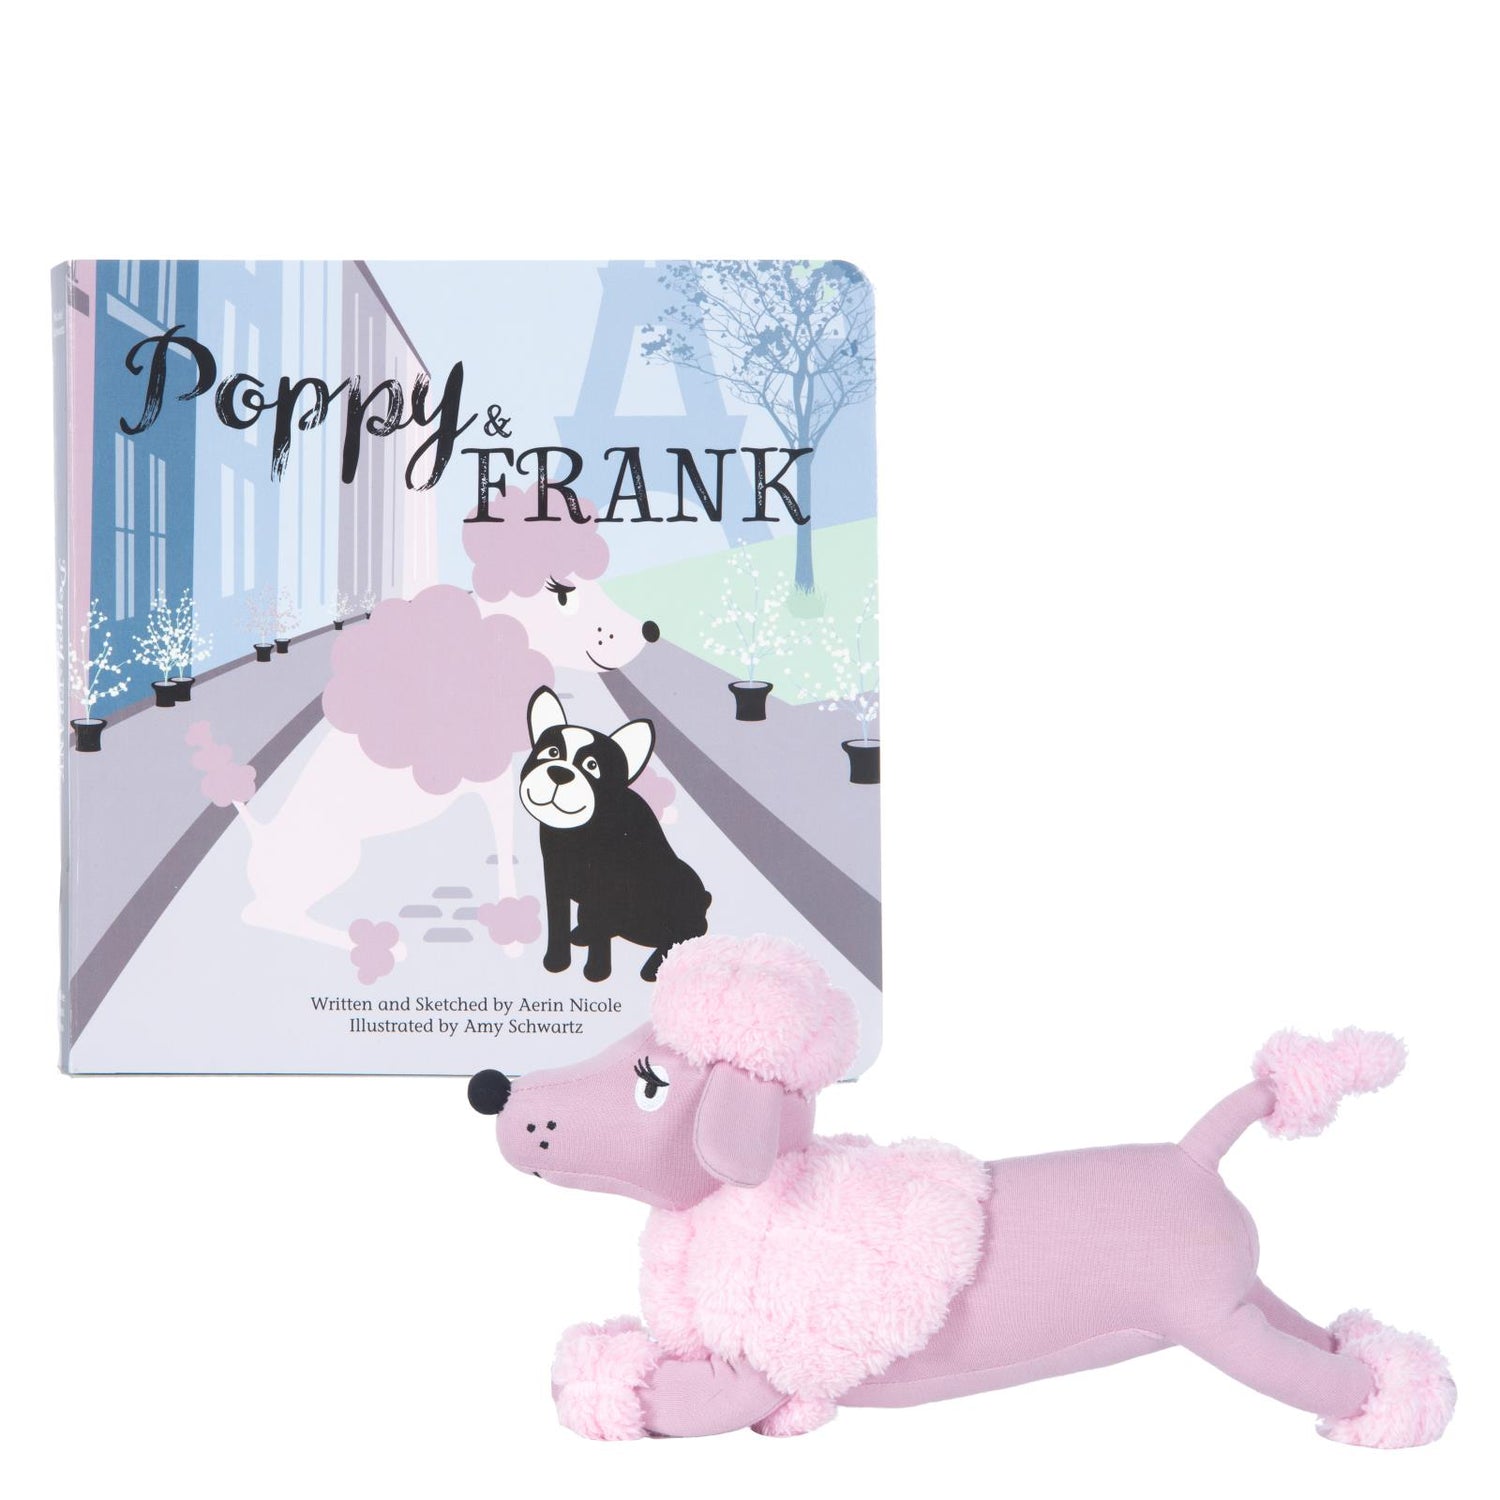 Book & Plush Combo in Poppy & Frank with Poppy the Poodle Plush